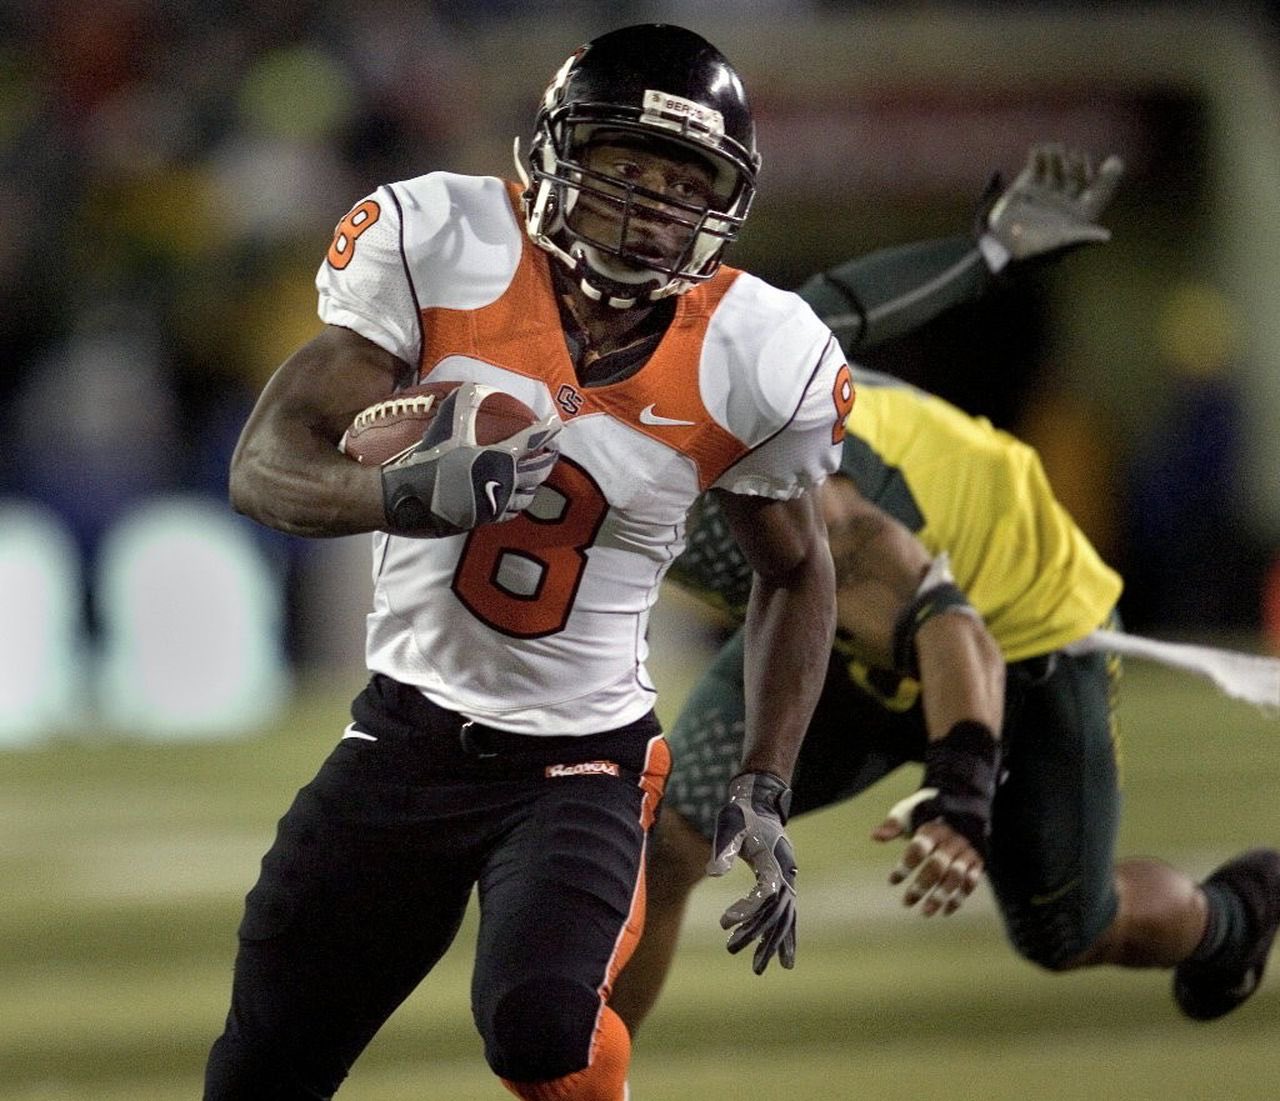 Uniform of the Day: Oregon State's Sports Bras